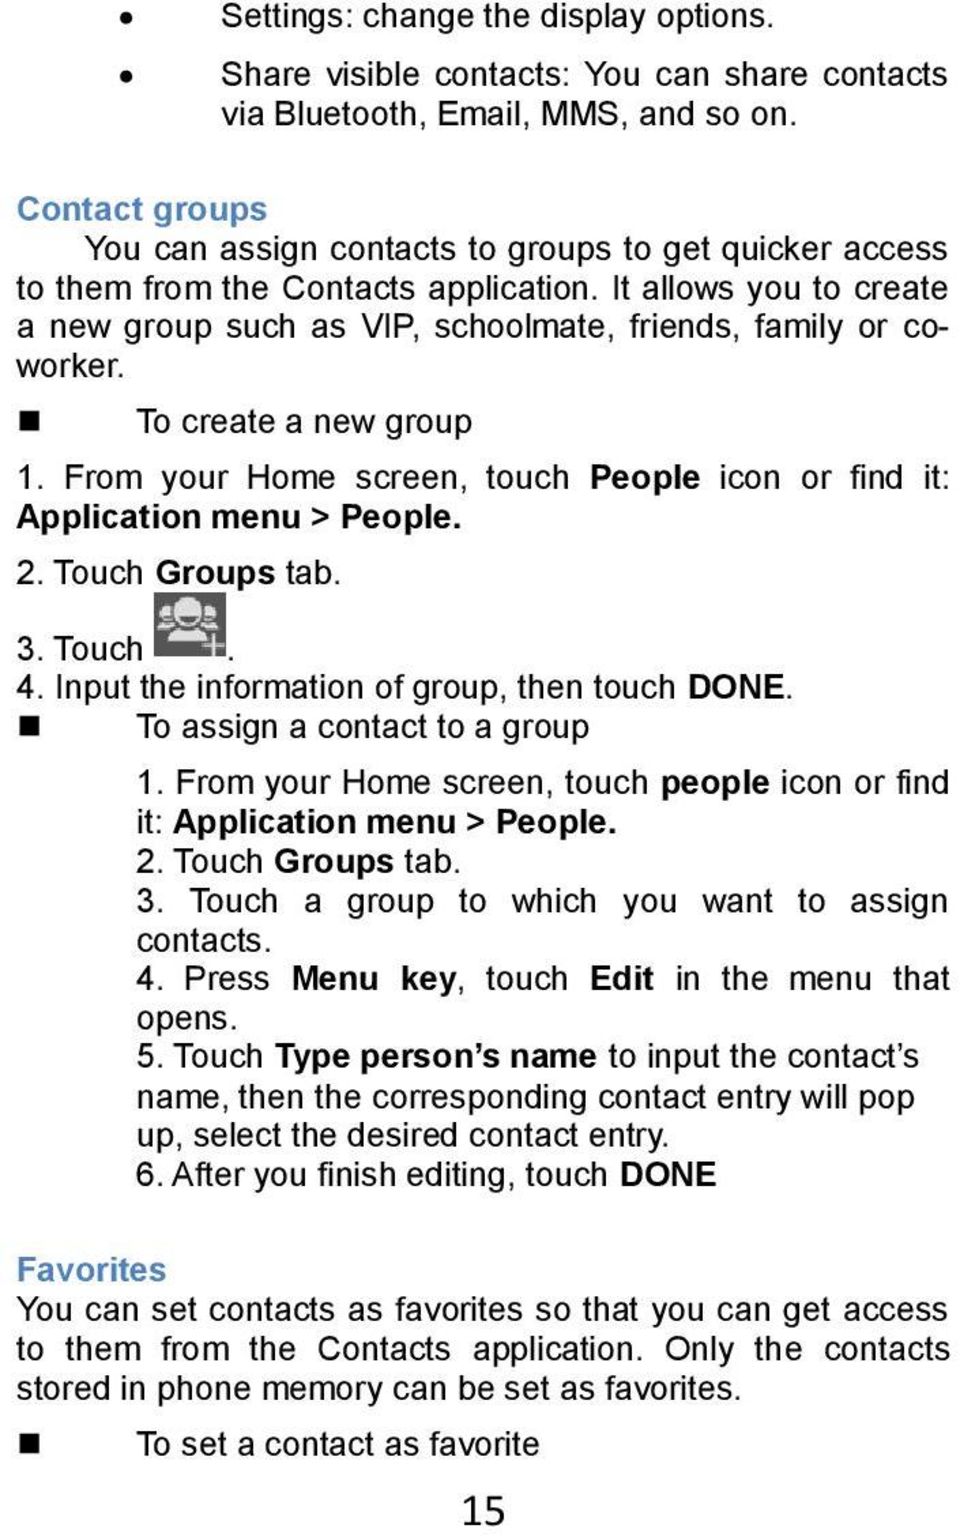 To create a new group 1. From your Home screen, touch People icon or find it: Application menu > People. 2. Touch Groups tab. 3. Touch. 4. Input the information of group, then touch DONE.